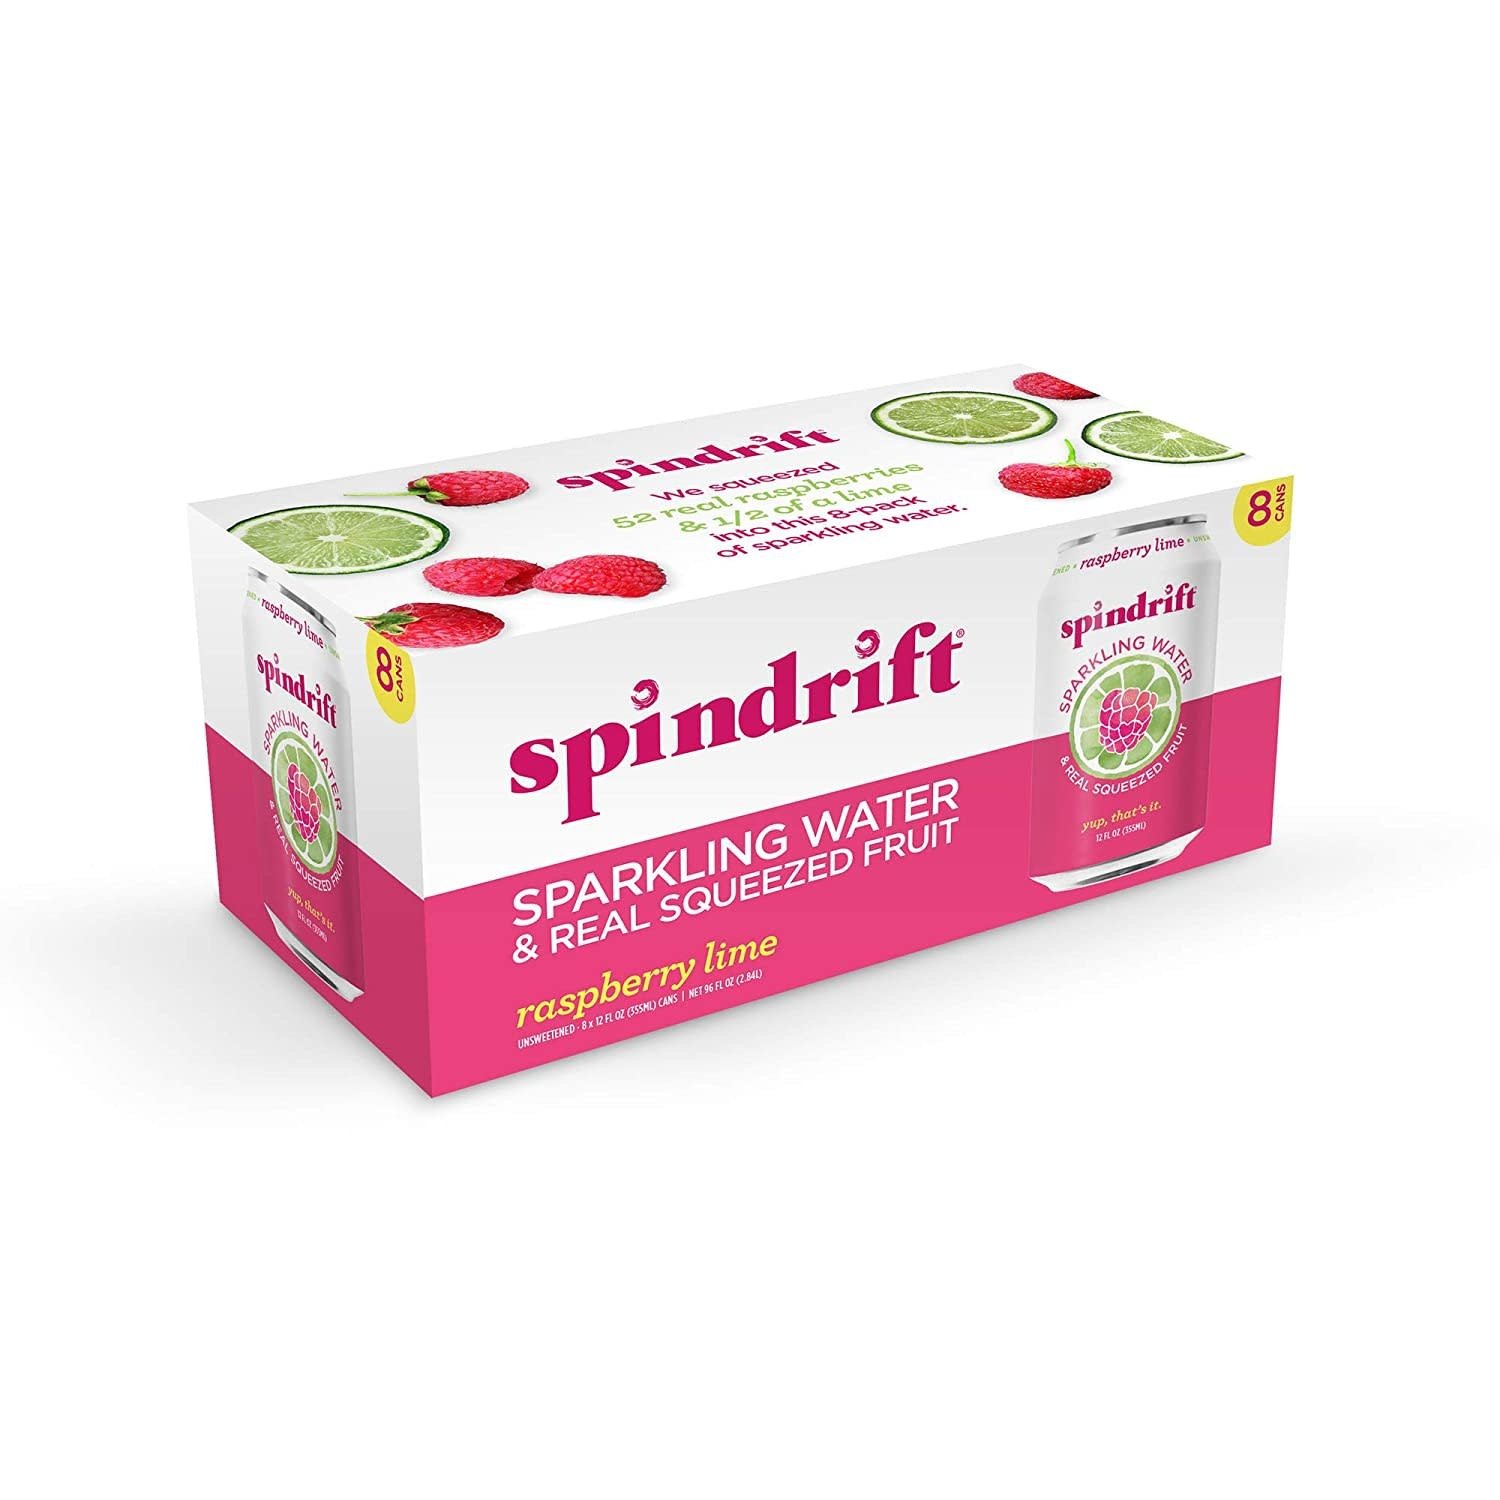 Spindrift Sparkling Water Raspberry Lime Cans 8pk - 12oz